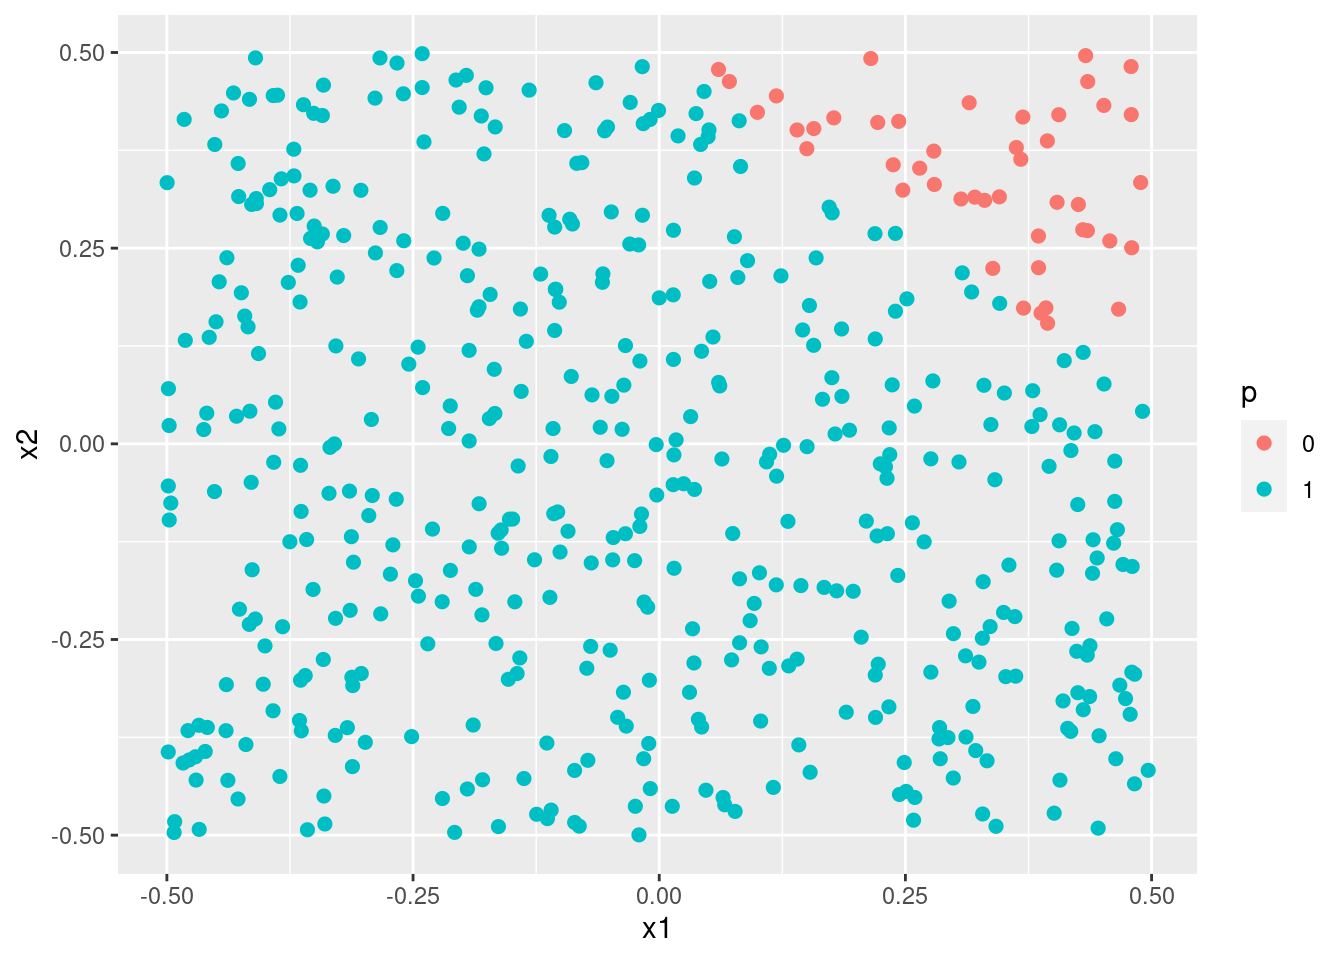 9 Support Vector Machines | An Introduction to Statistical Learning